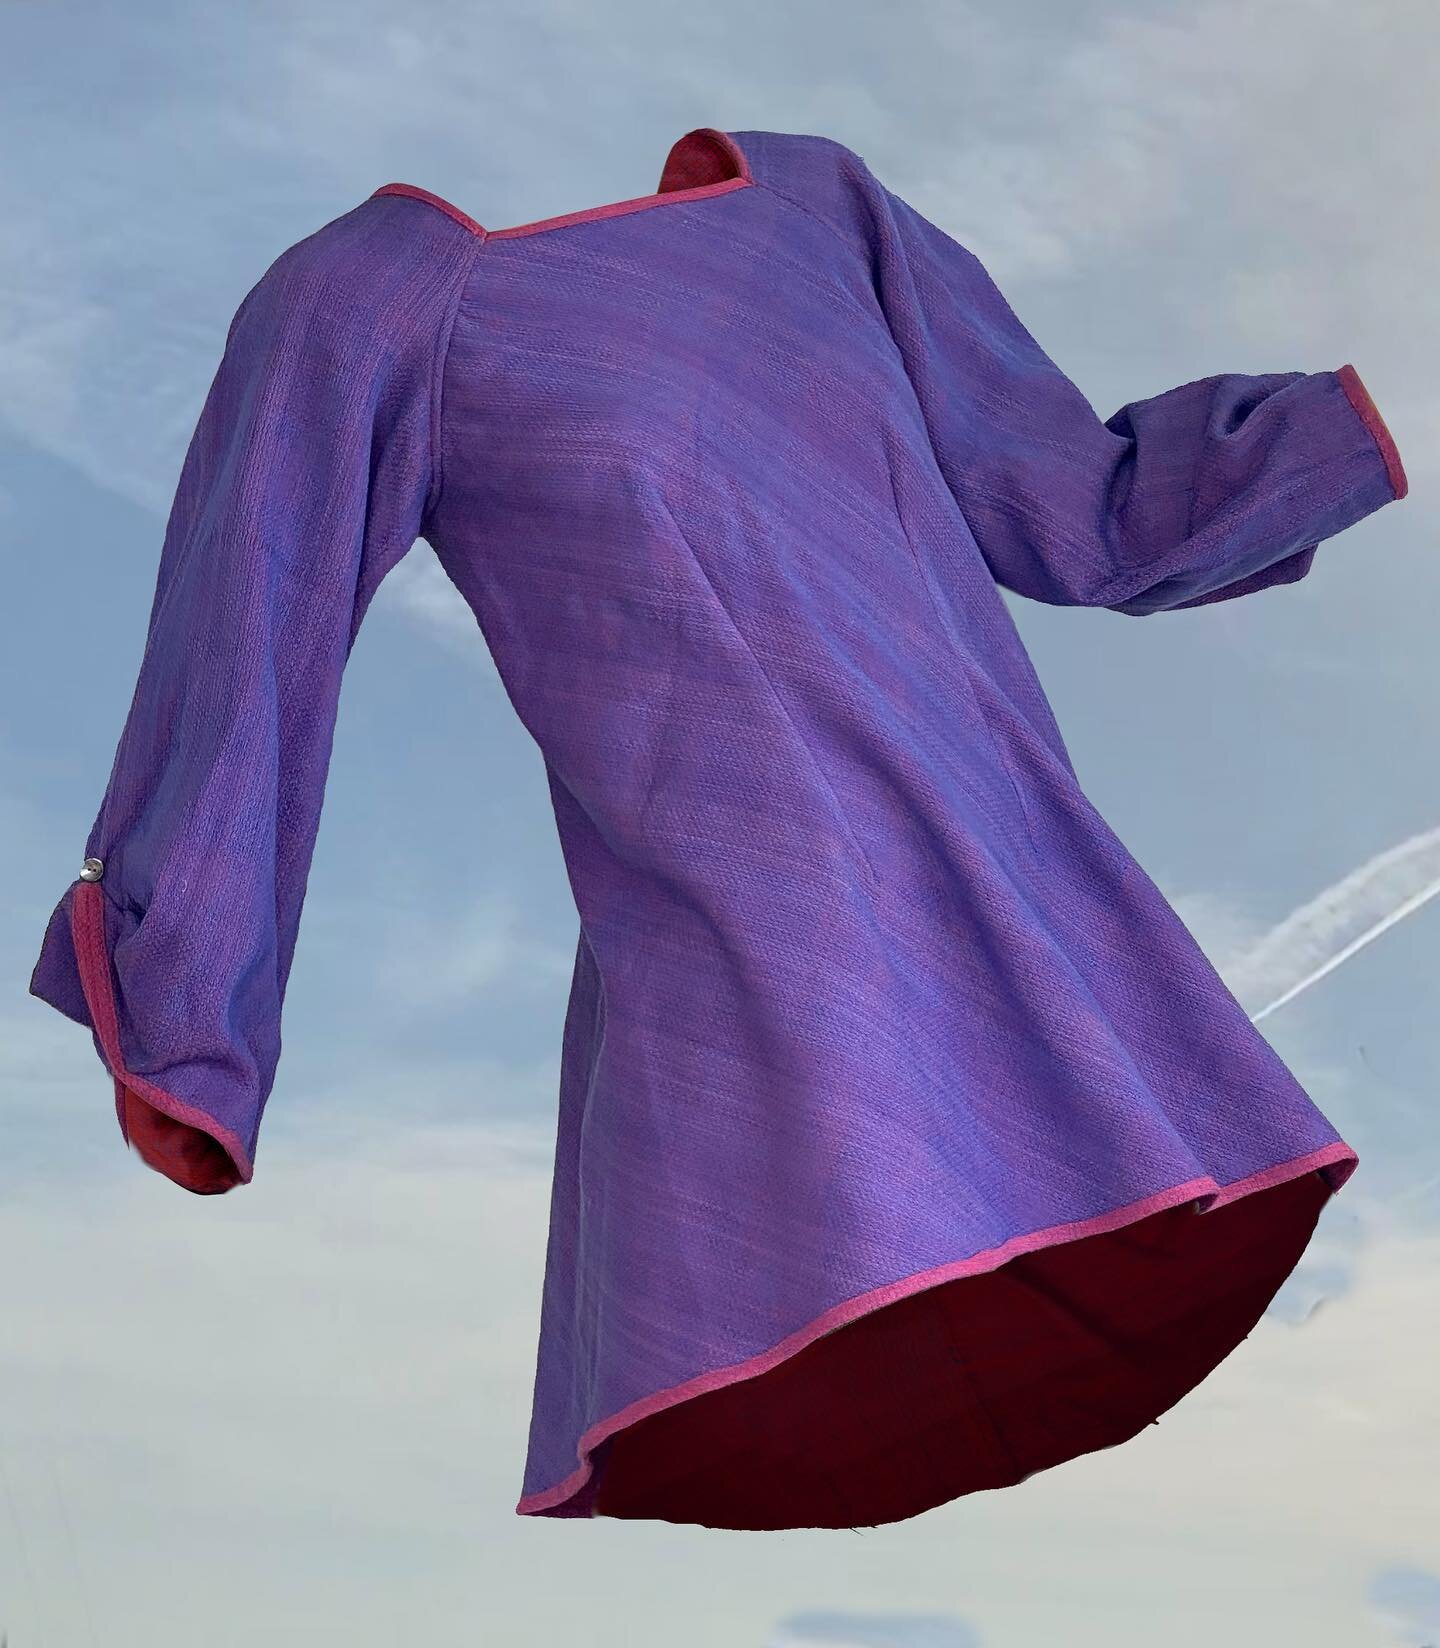 The Bias Swing dress in Periwinkle

Available @thecanvasnyc @oculusnyc or made to measure on our website Xoomba.com